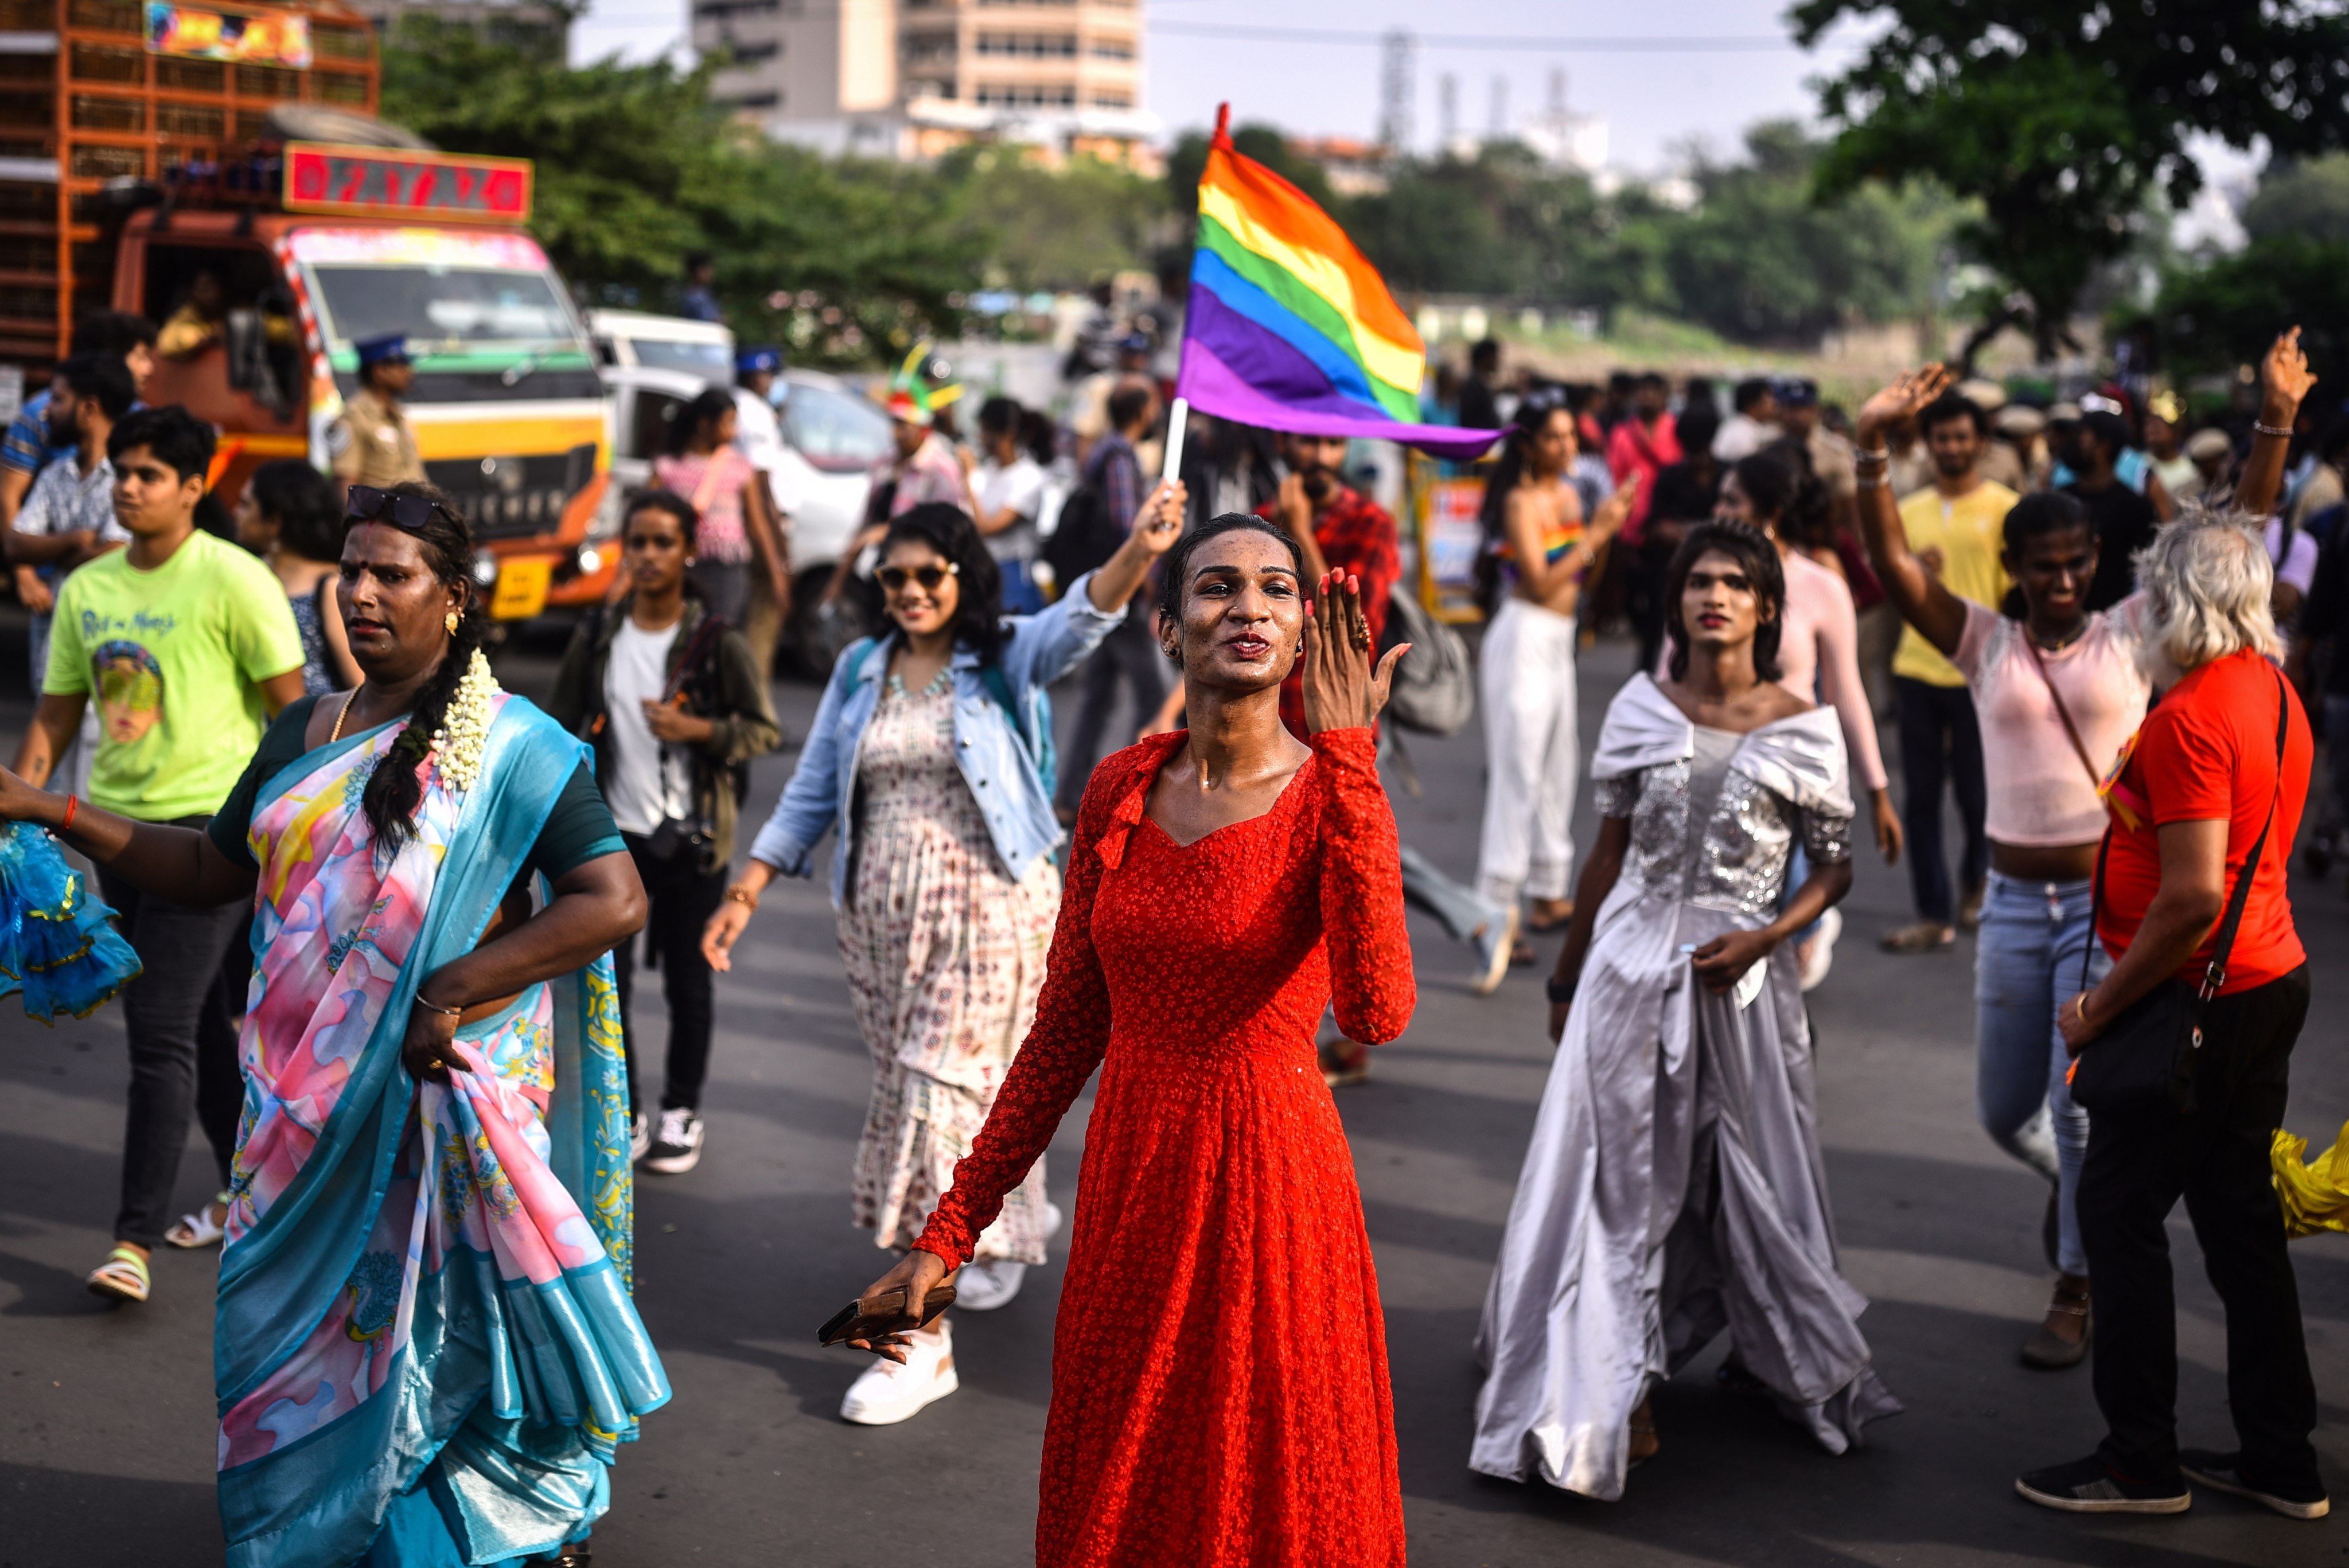 If India legalises gay marriage in the coming months, it will become only the third place in Asia to do so, after Taiwan and Nepal. Photo: EPA-EFE